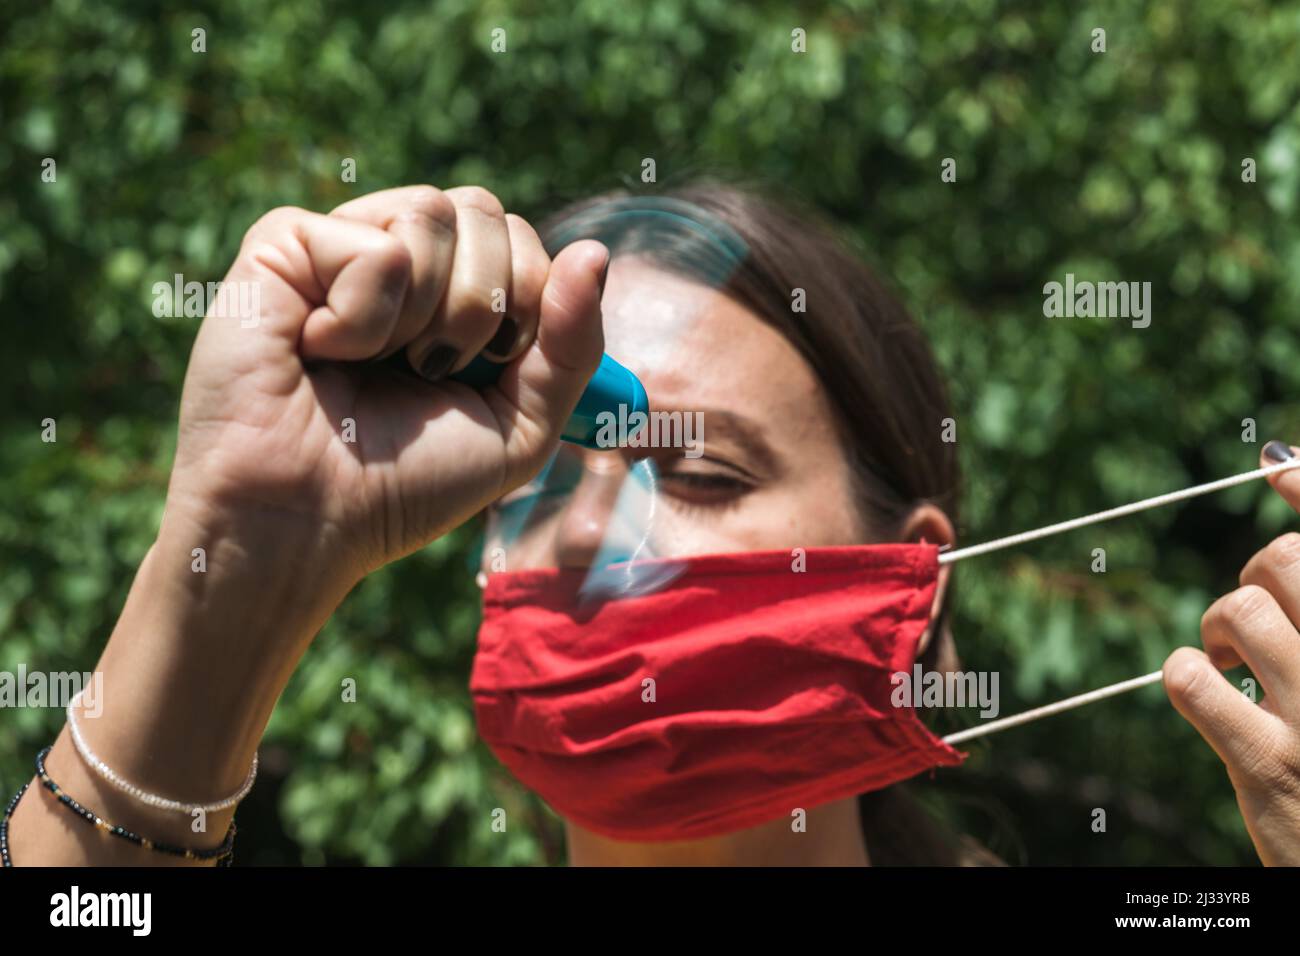 young woman cooling down with hand held ventilator while wearing a protective face mask Stock Photo